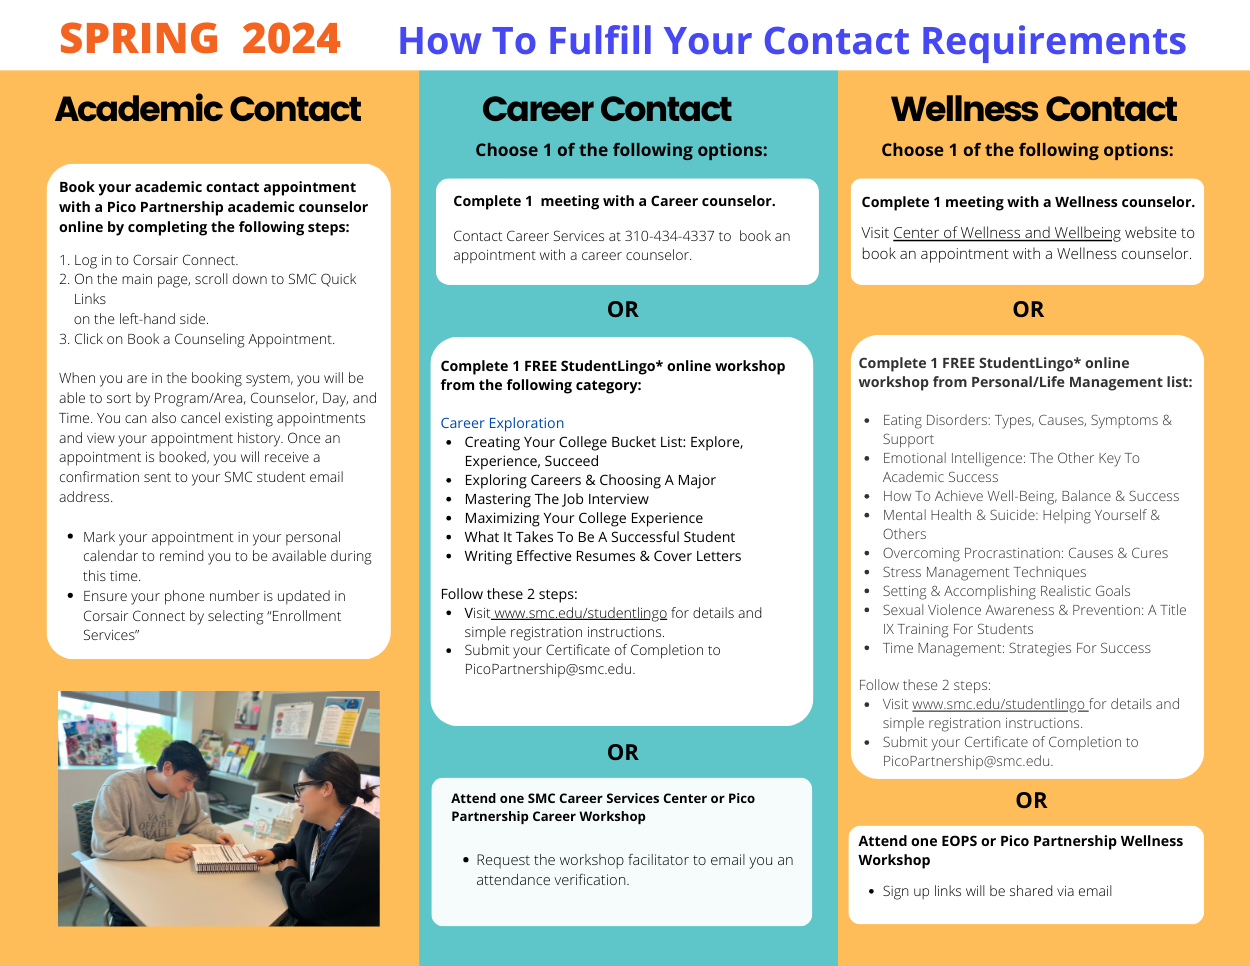 Spring 2024 How to Fulfill Your Contacts